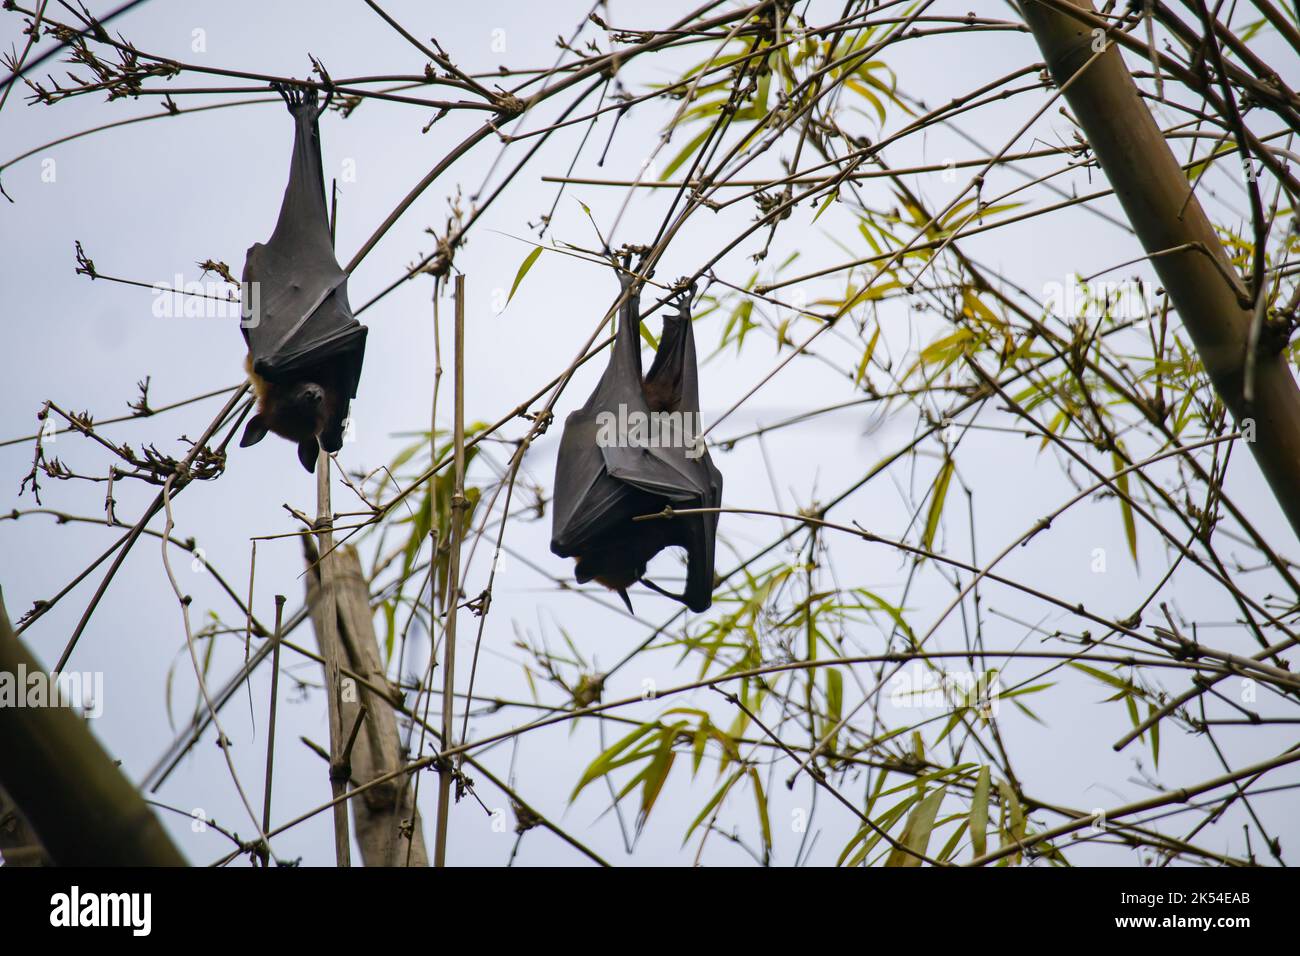 black fruit bats hanging upside down from tree branches in kolkata. these nocturnal animals sleep in this position in daytime. Stock Photo